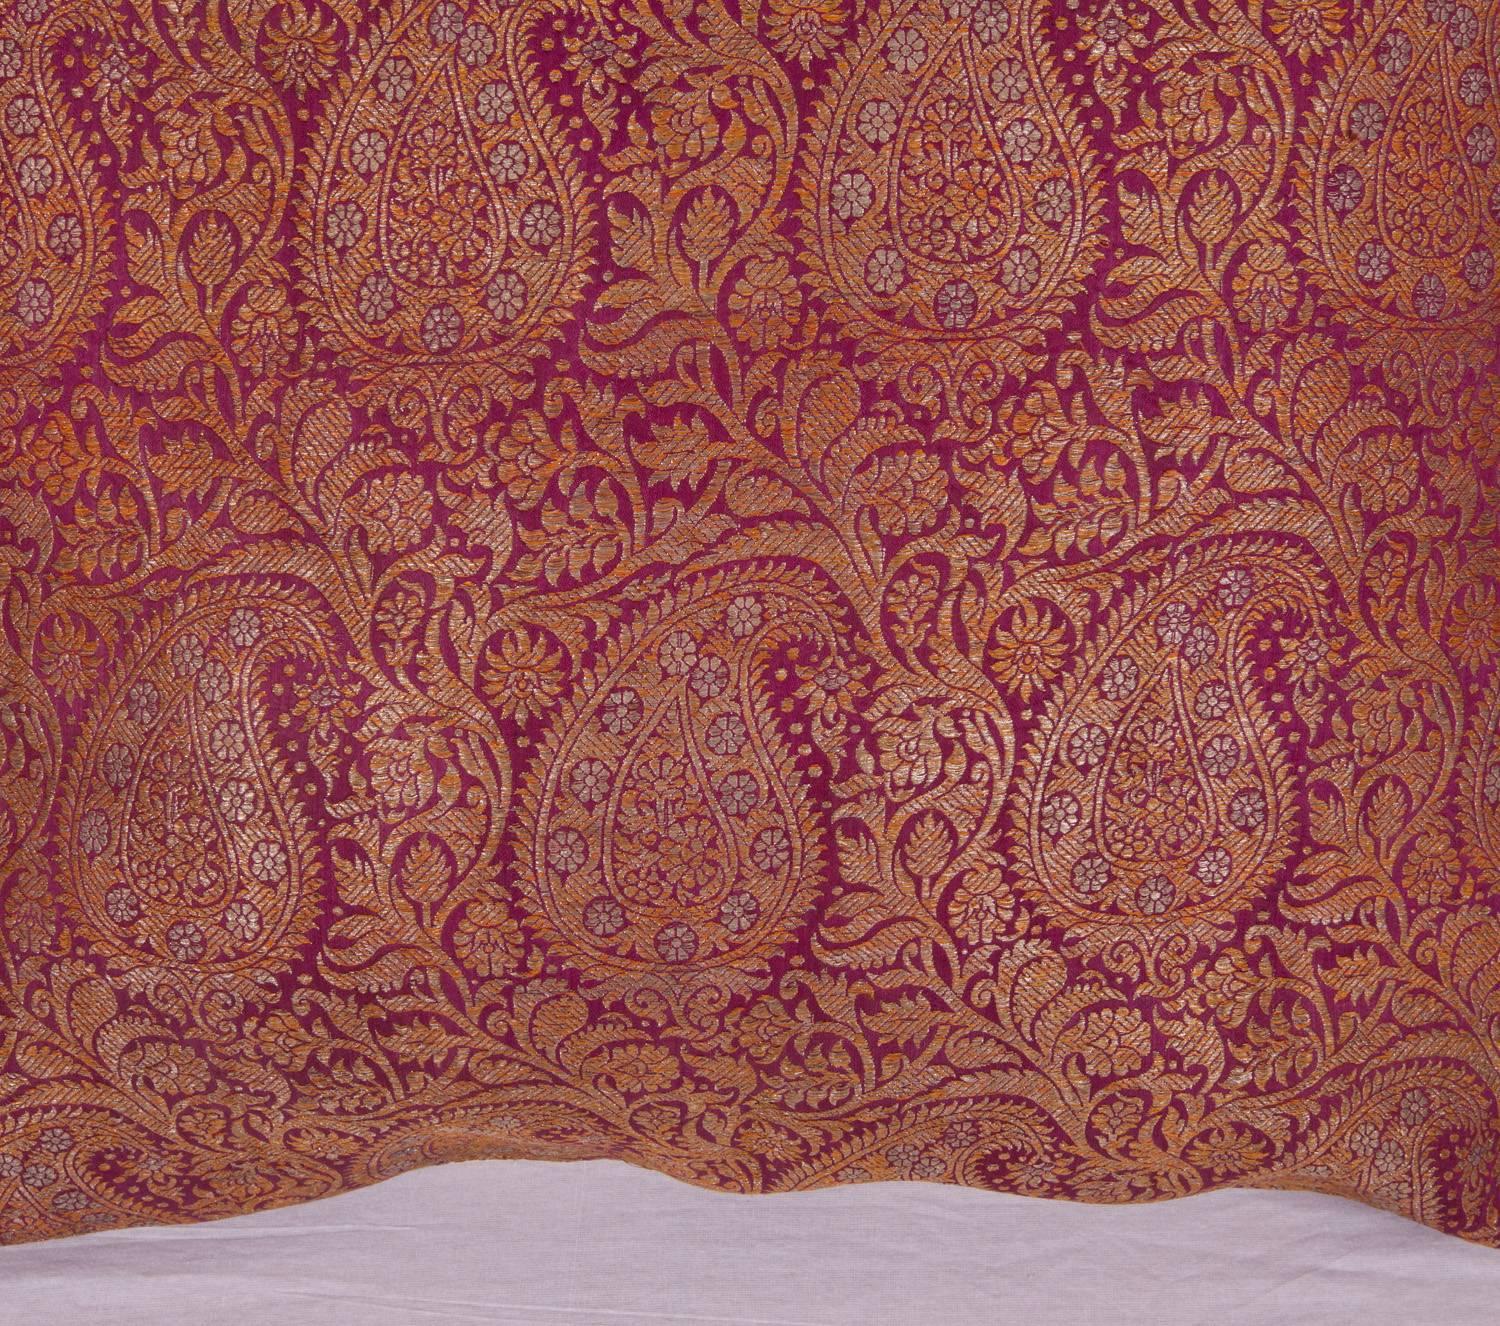 Hand-Woven Antique Pillow Case Fashioned from Early 20th Century Indian Zari Brocade For Sale